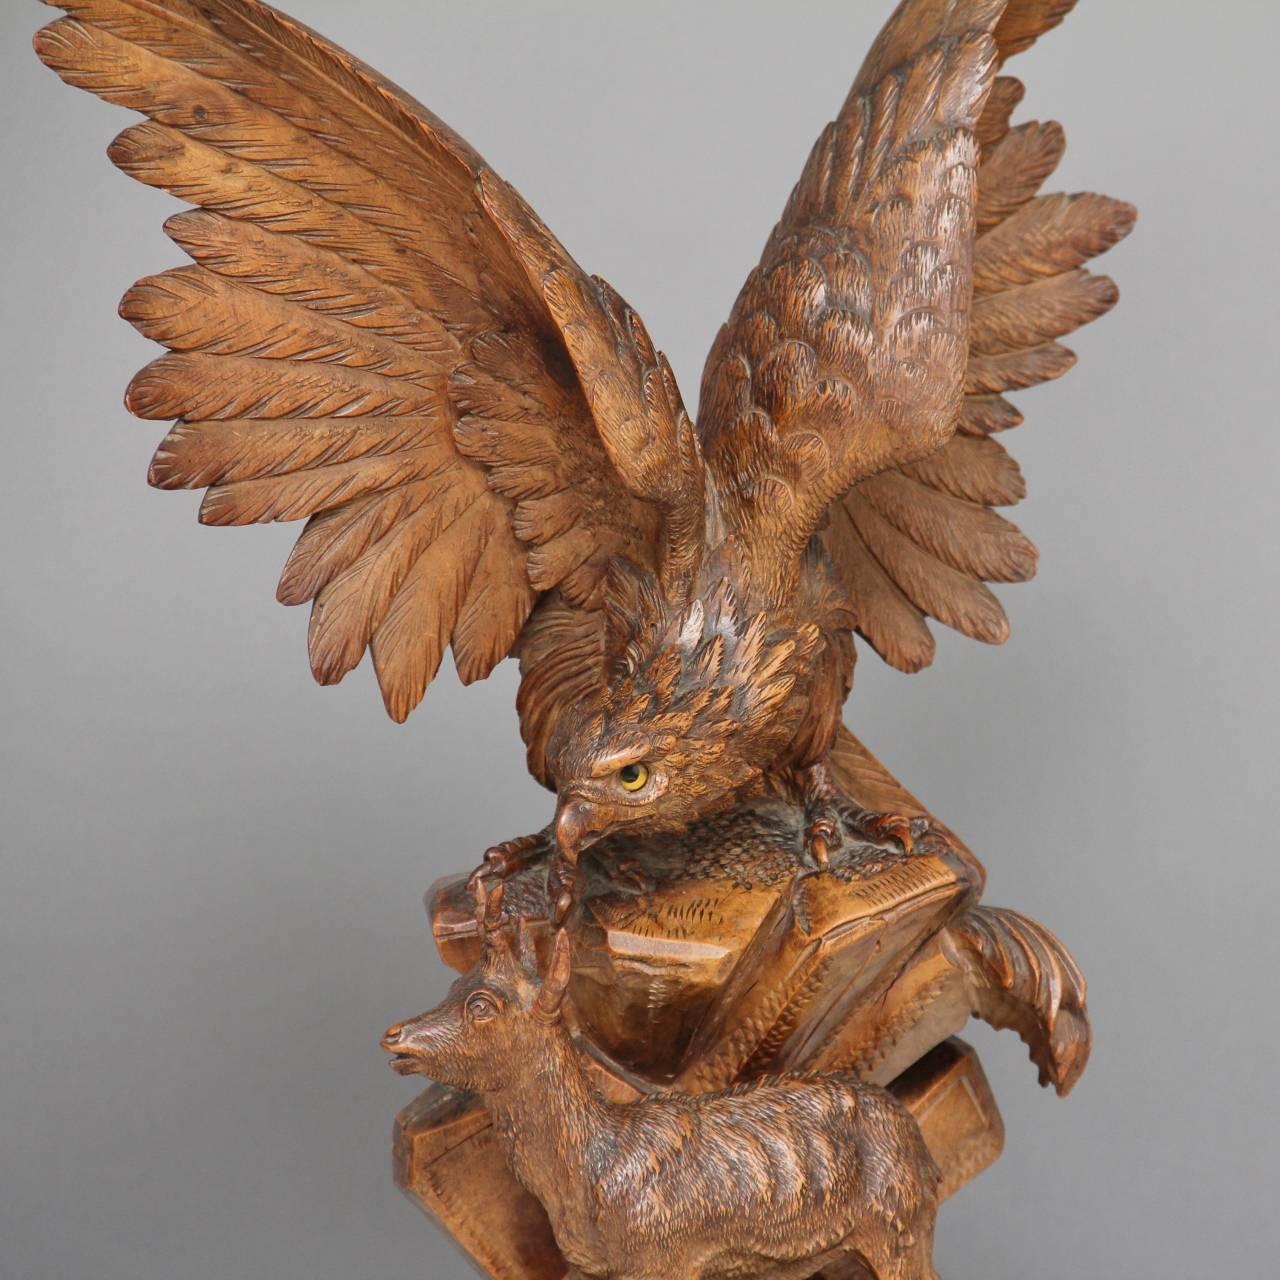 19th century walnut Black Forest carving of a eagle perched on a rock with a deer below, lovely crisp carving and fabulous quality, circa 1880.